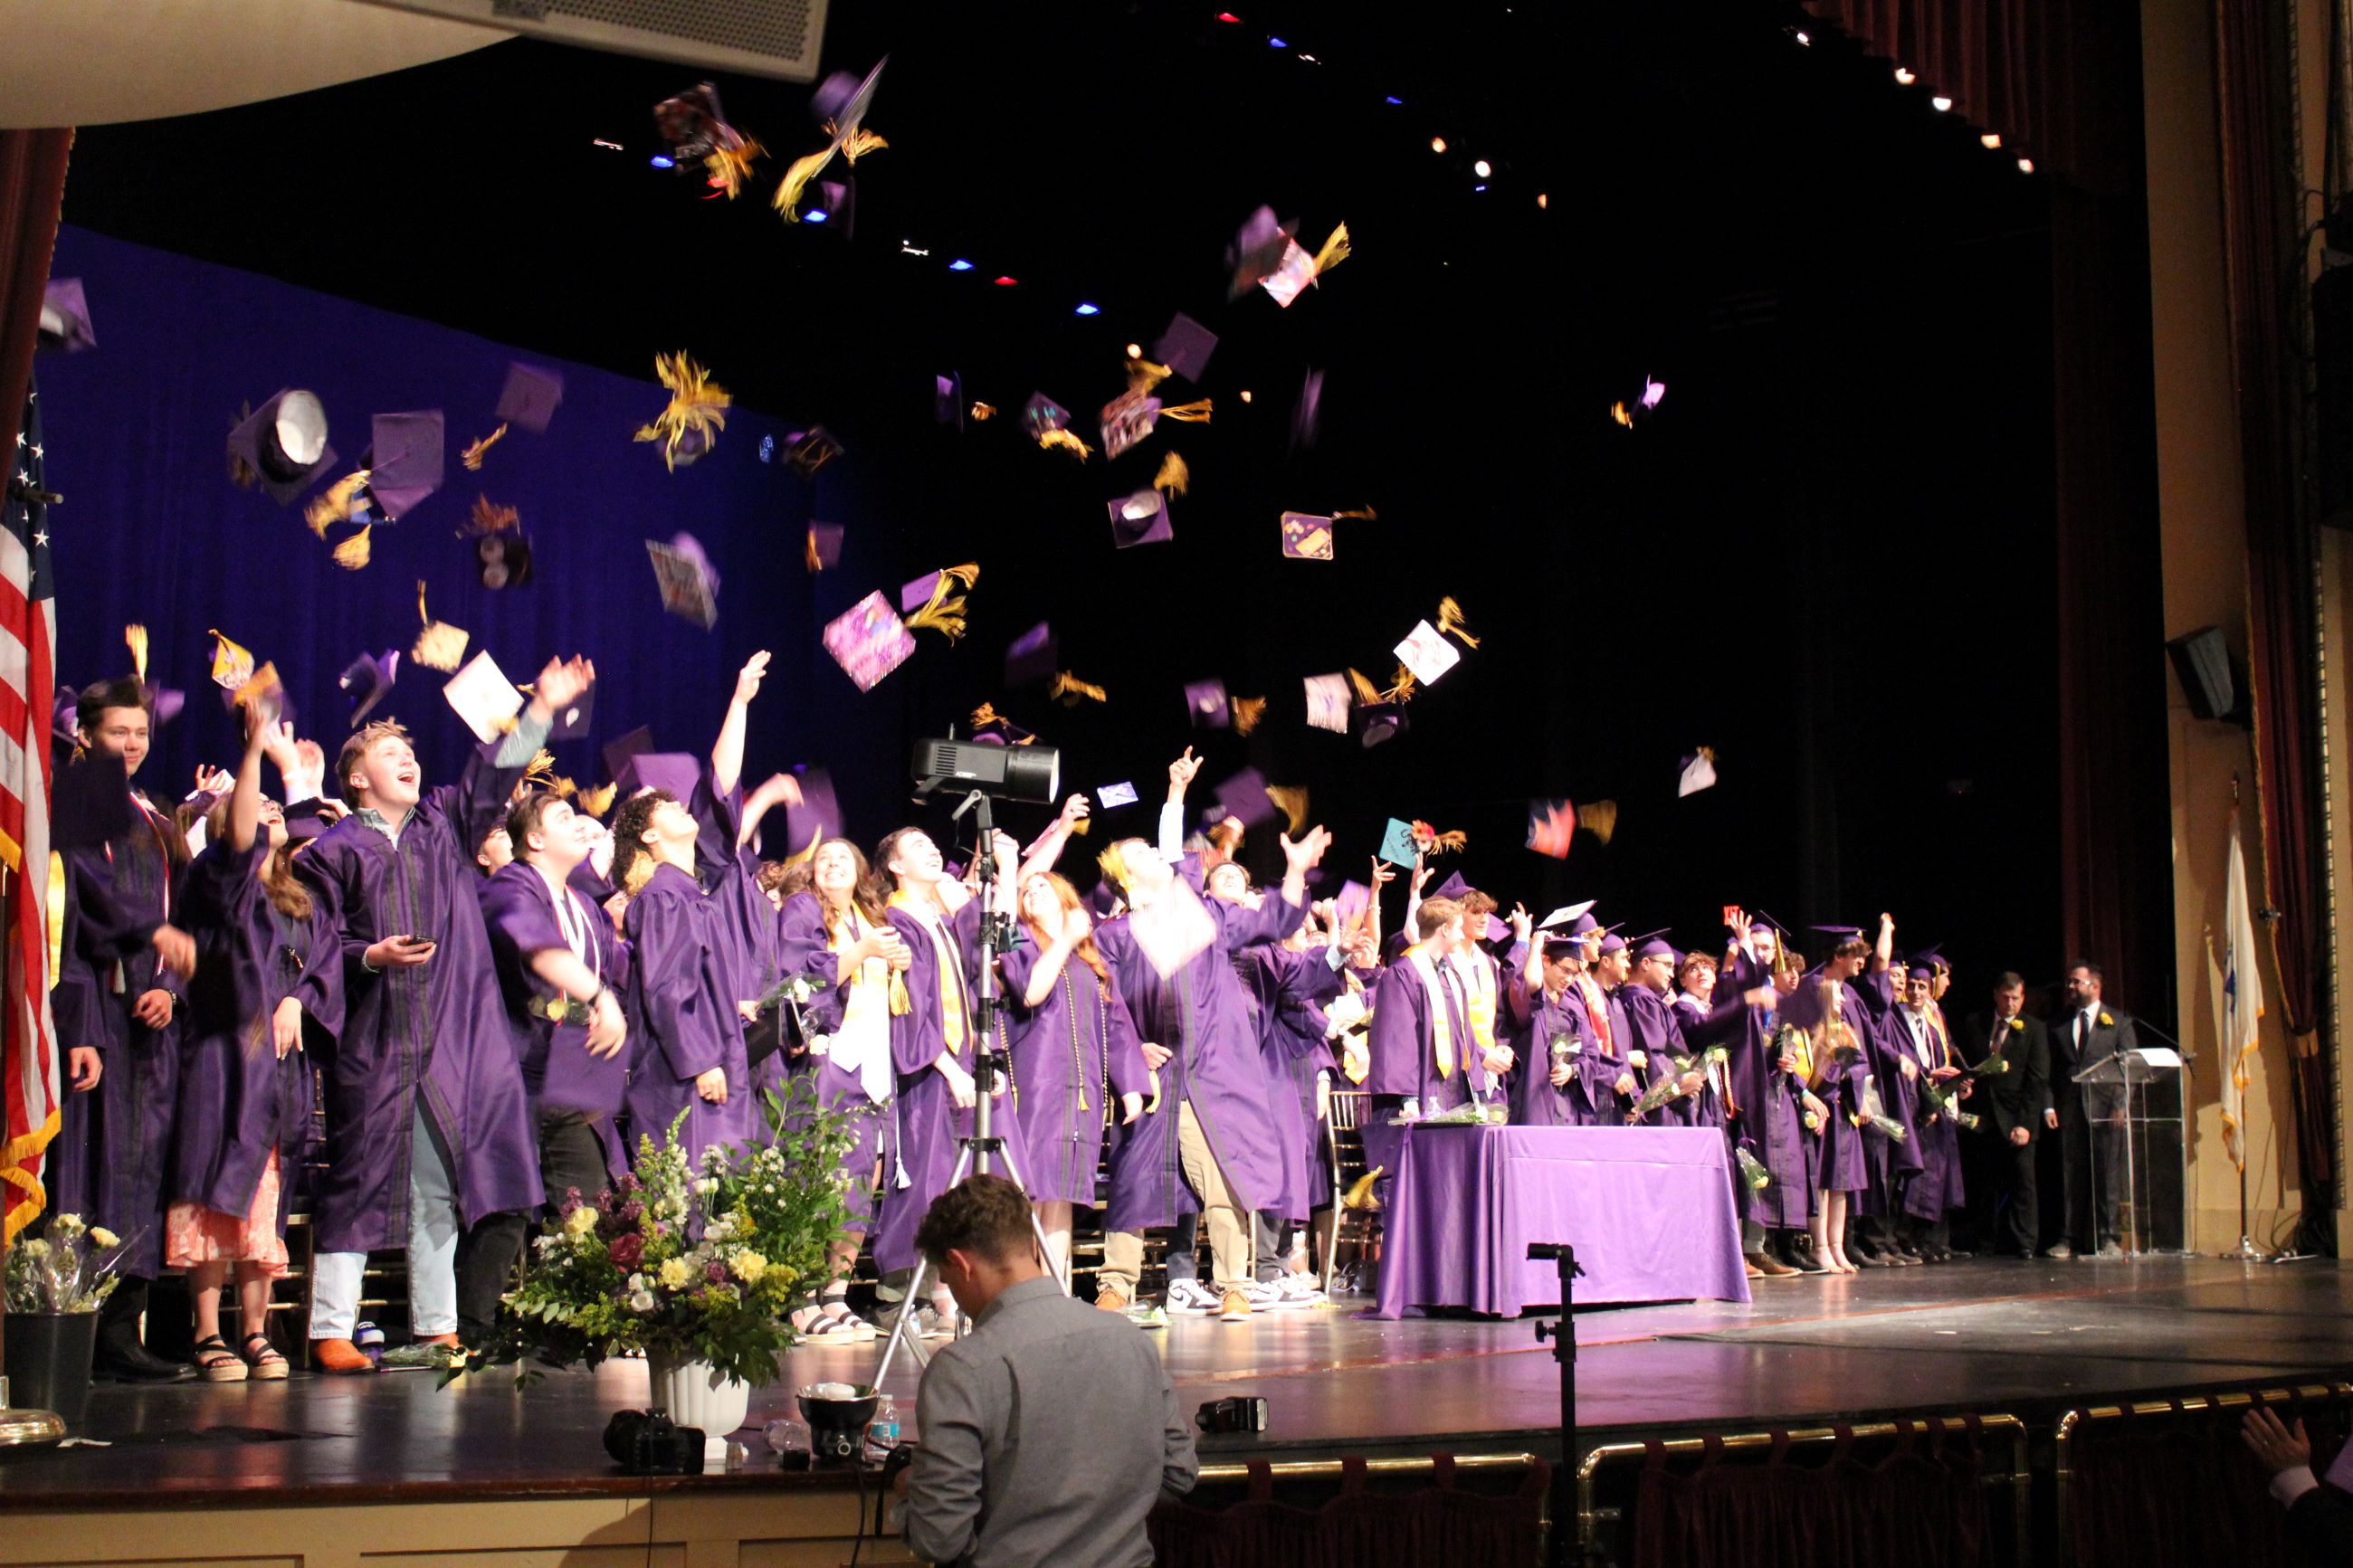 Blackstone Valley Tech holds commencement ceremony